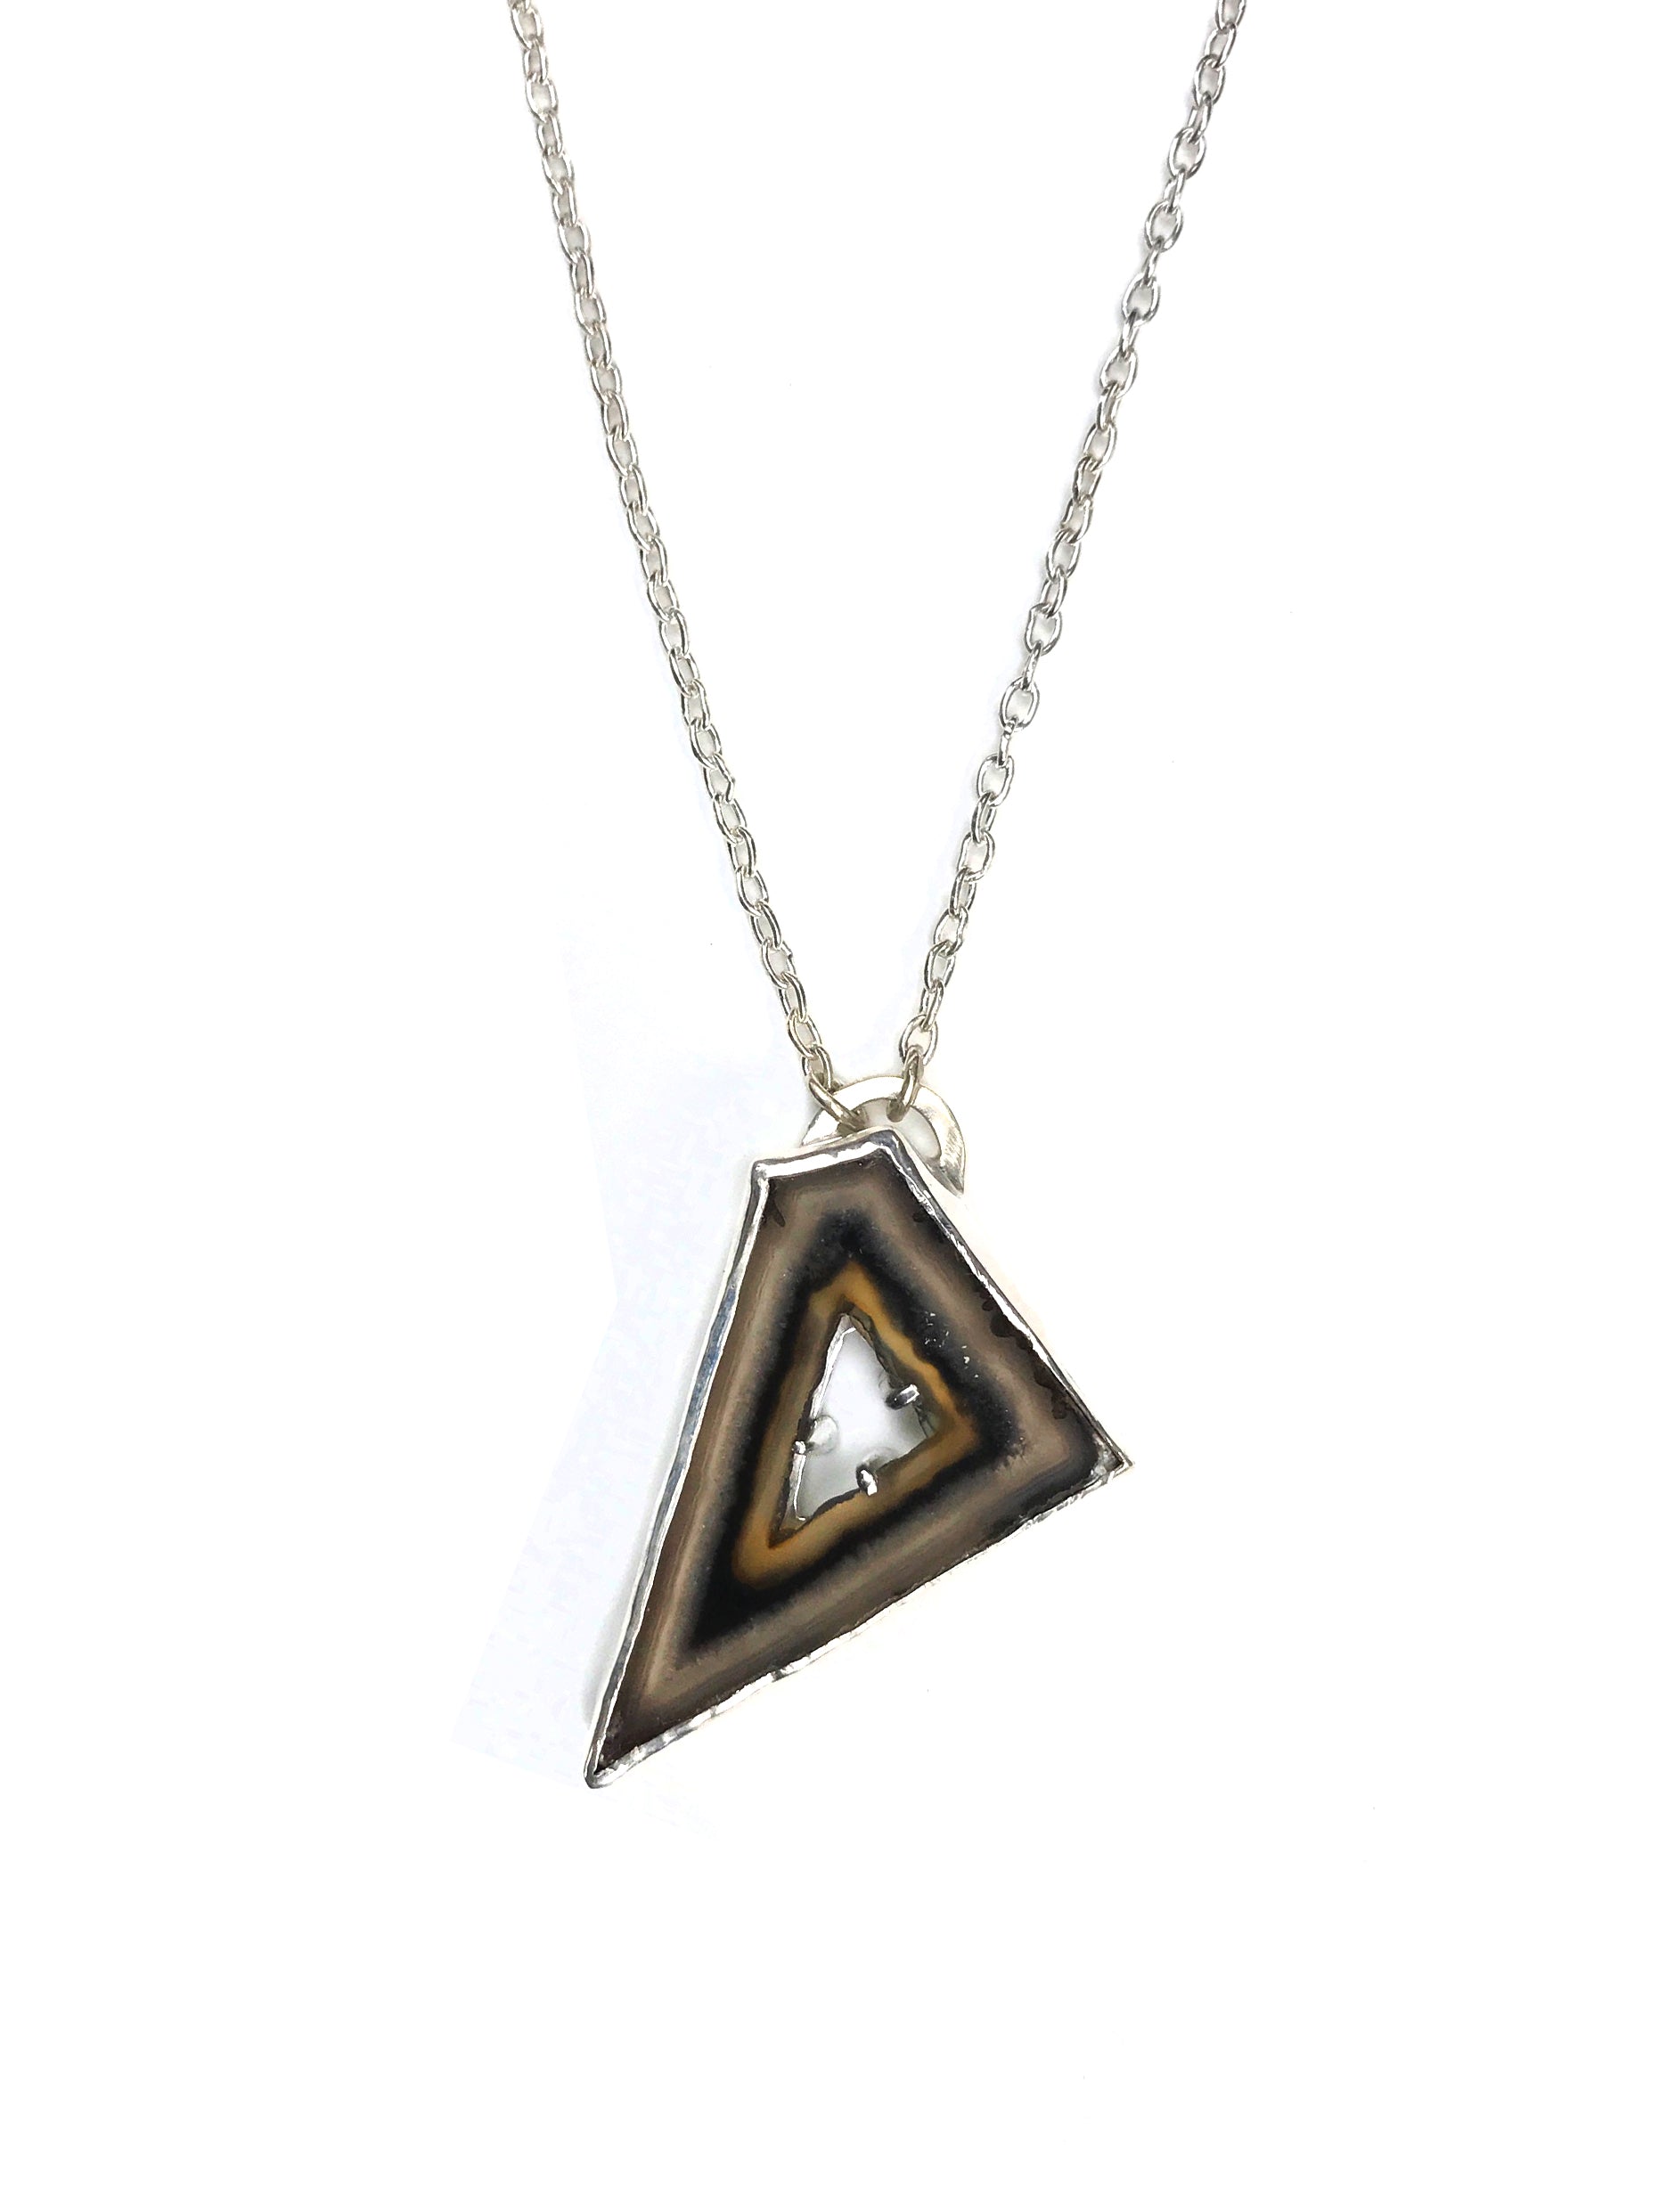 Polyhedron Agate Necklace